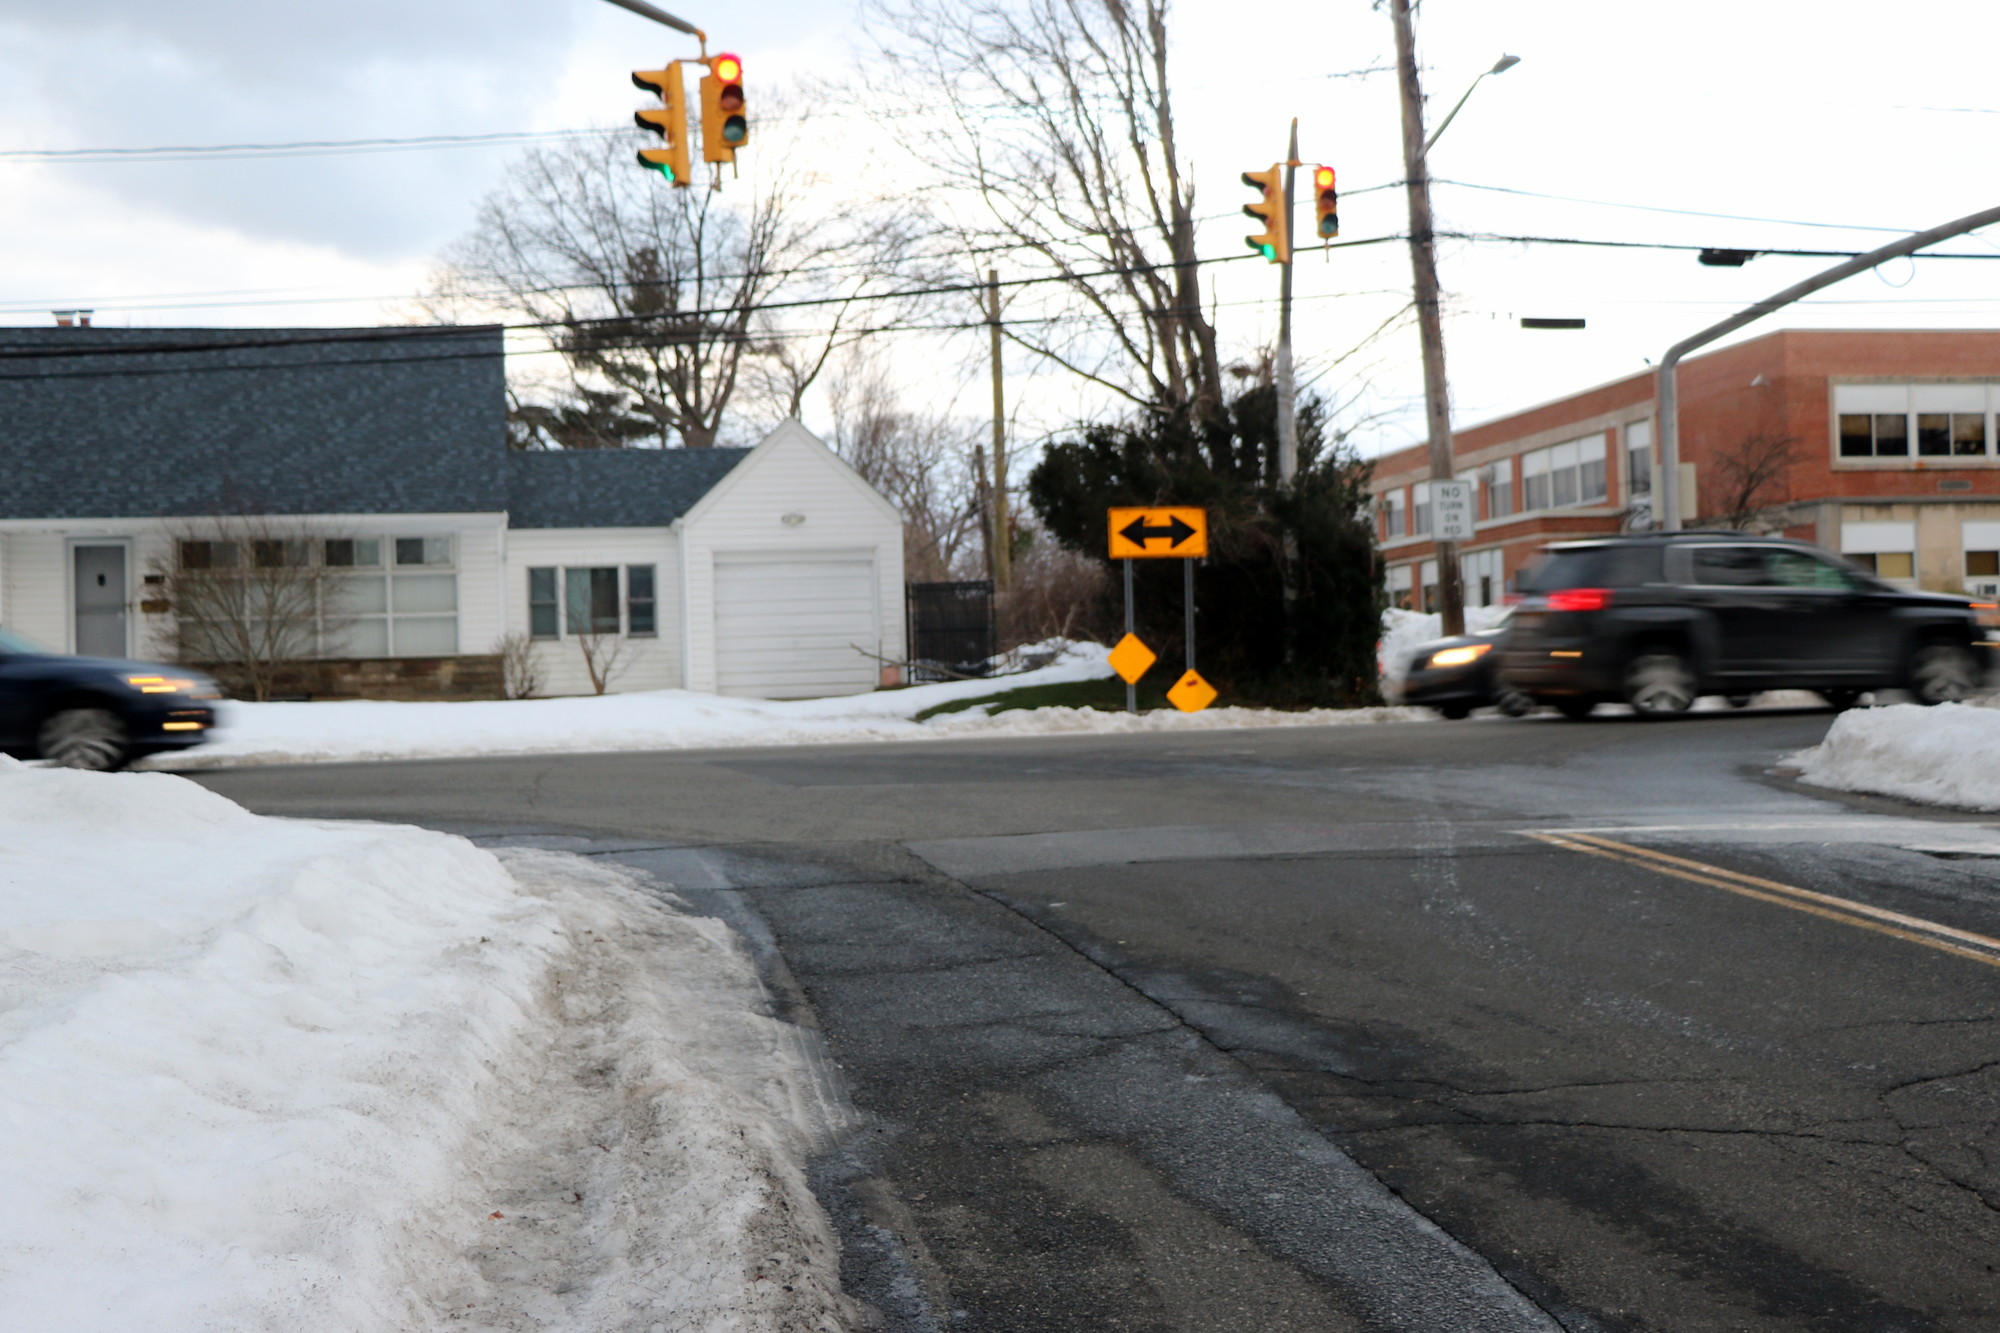 A school crossing guard who was stationed at the intersection of Nassau Boulevard and Johnson Lane, near West Hempstead High School, was removed by the county in December. Adding to the potential danger, homeowners have not shoveled their sidewalks, forcing students to walk in the street to get to school.